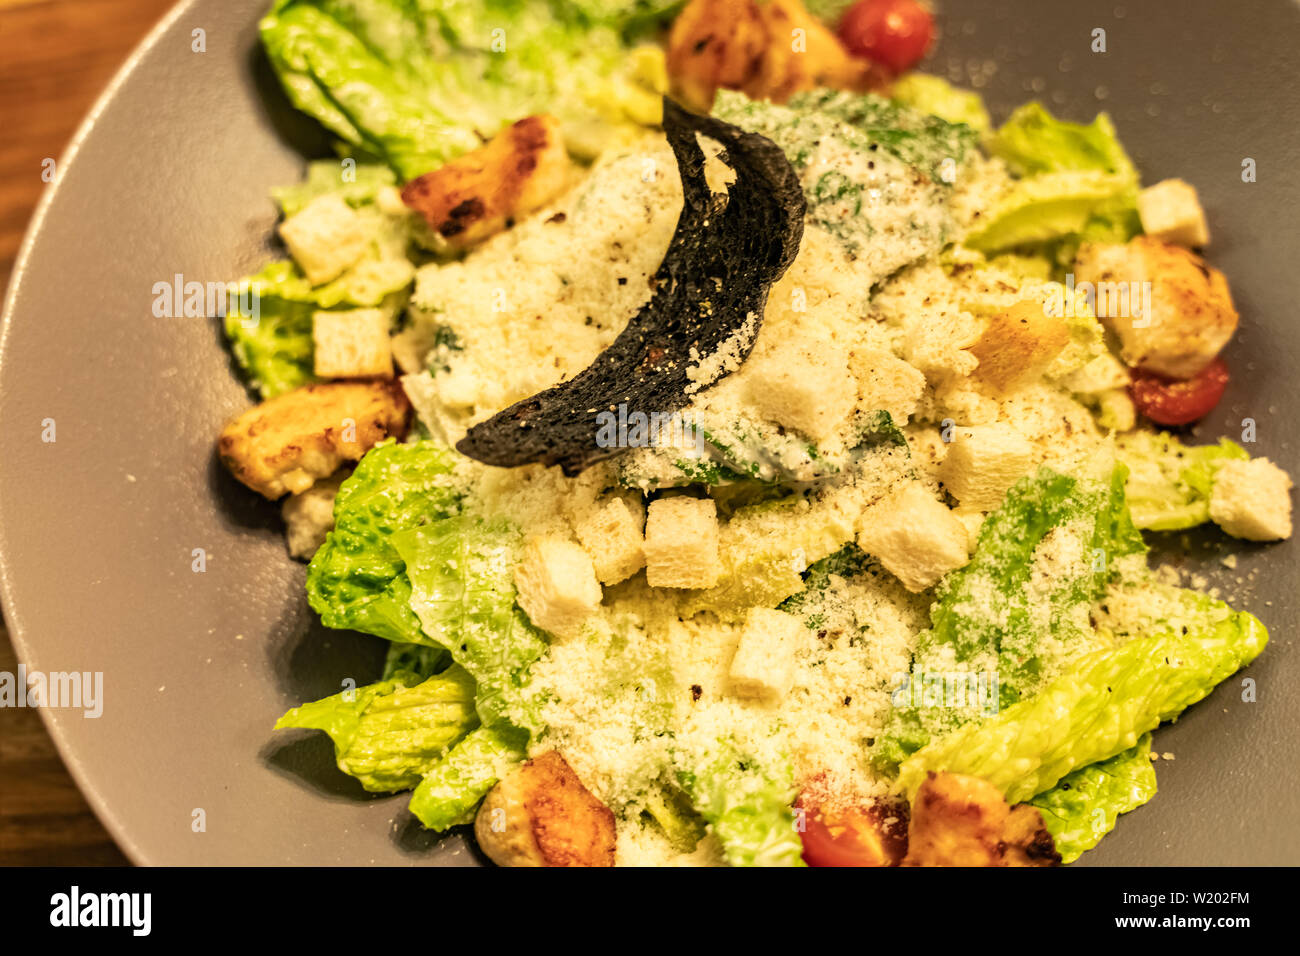 Healthy Caesar salad in brown plate on dark wooden table with Shallow depth of focus over dark grunge background Stock Photo